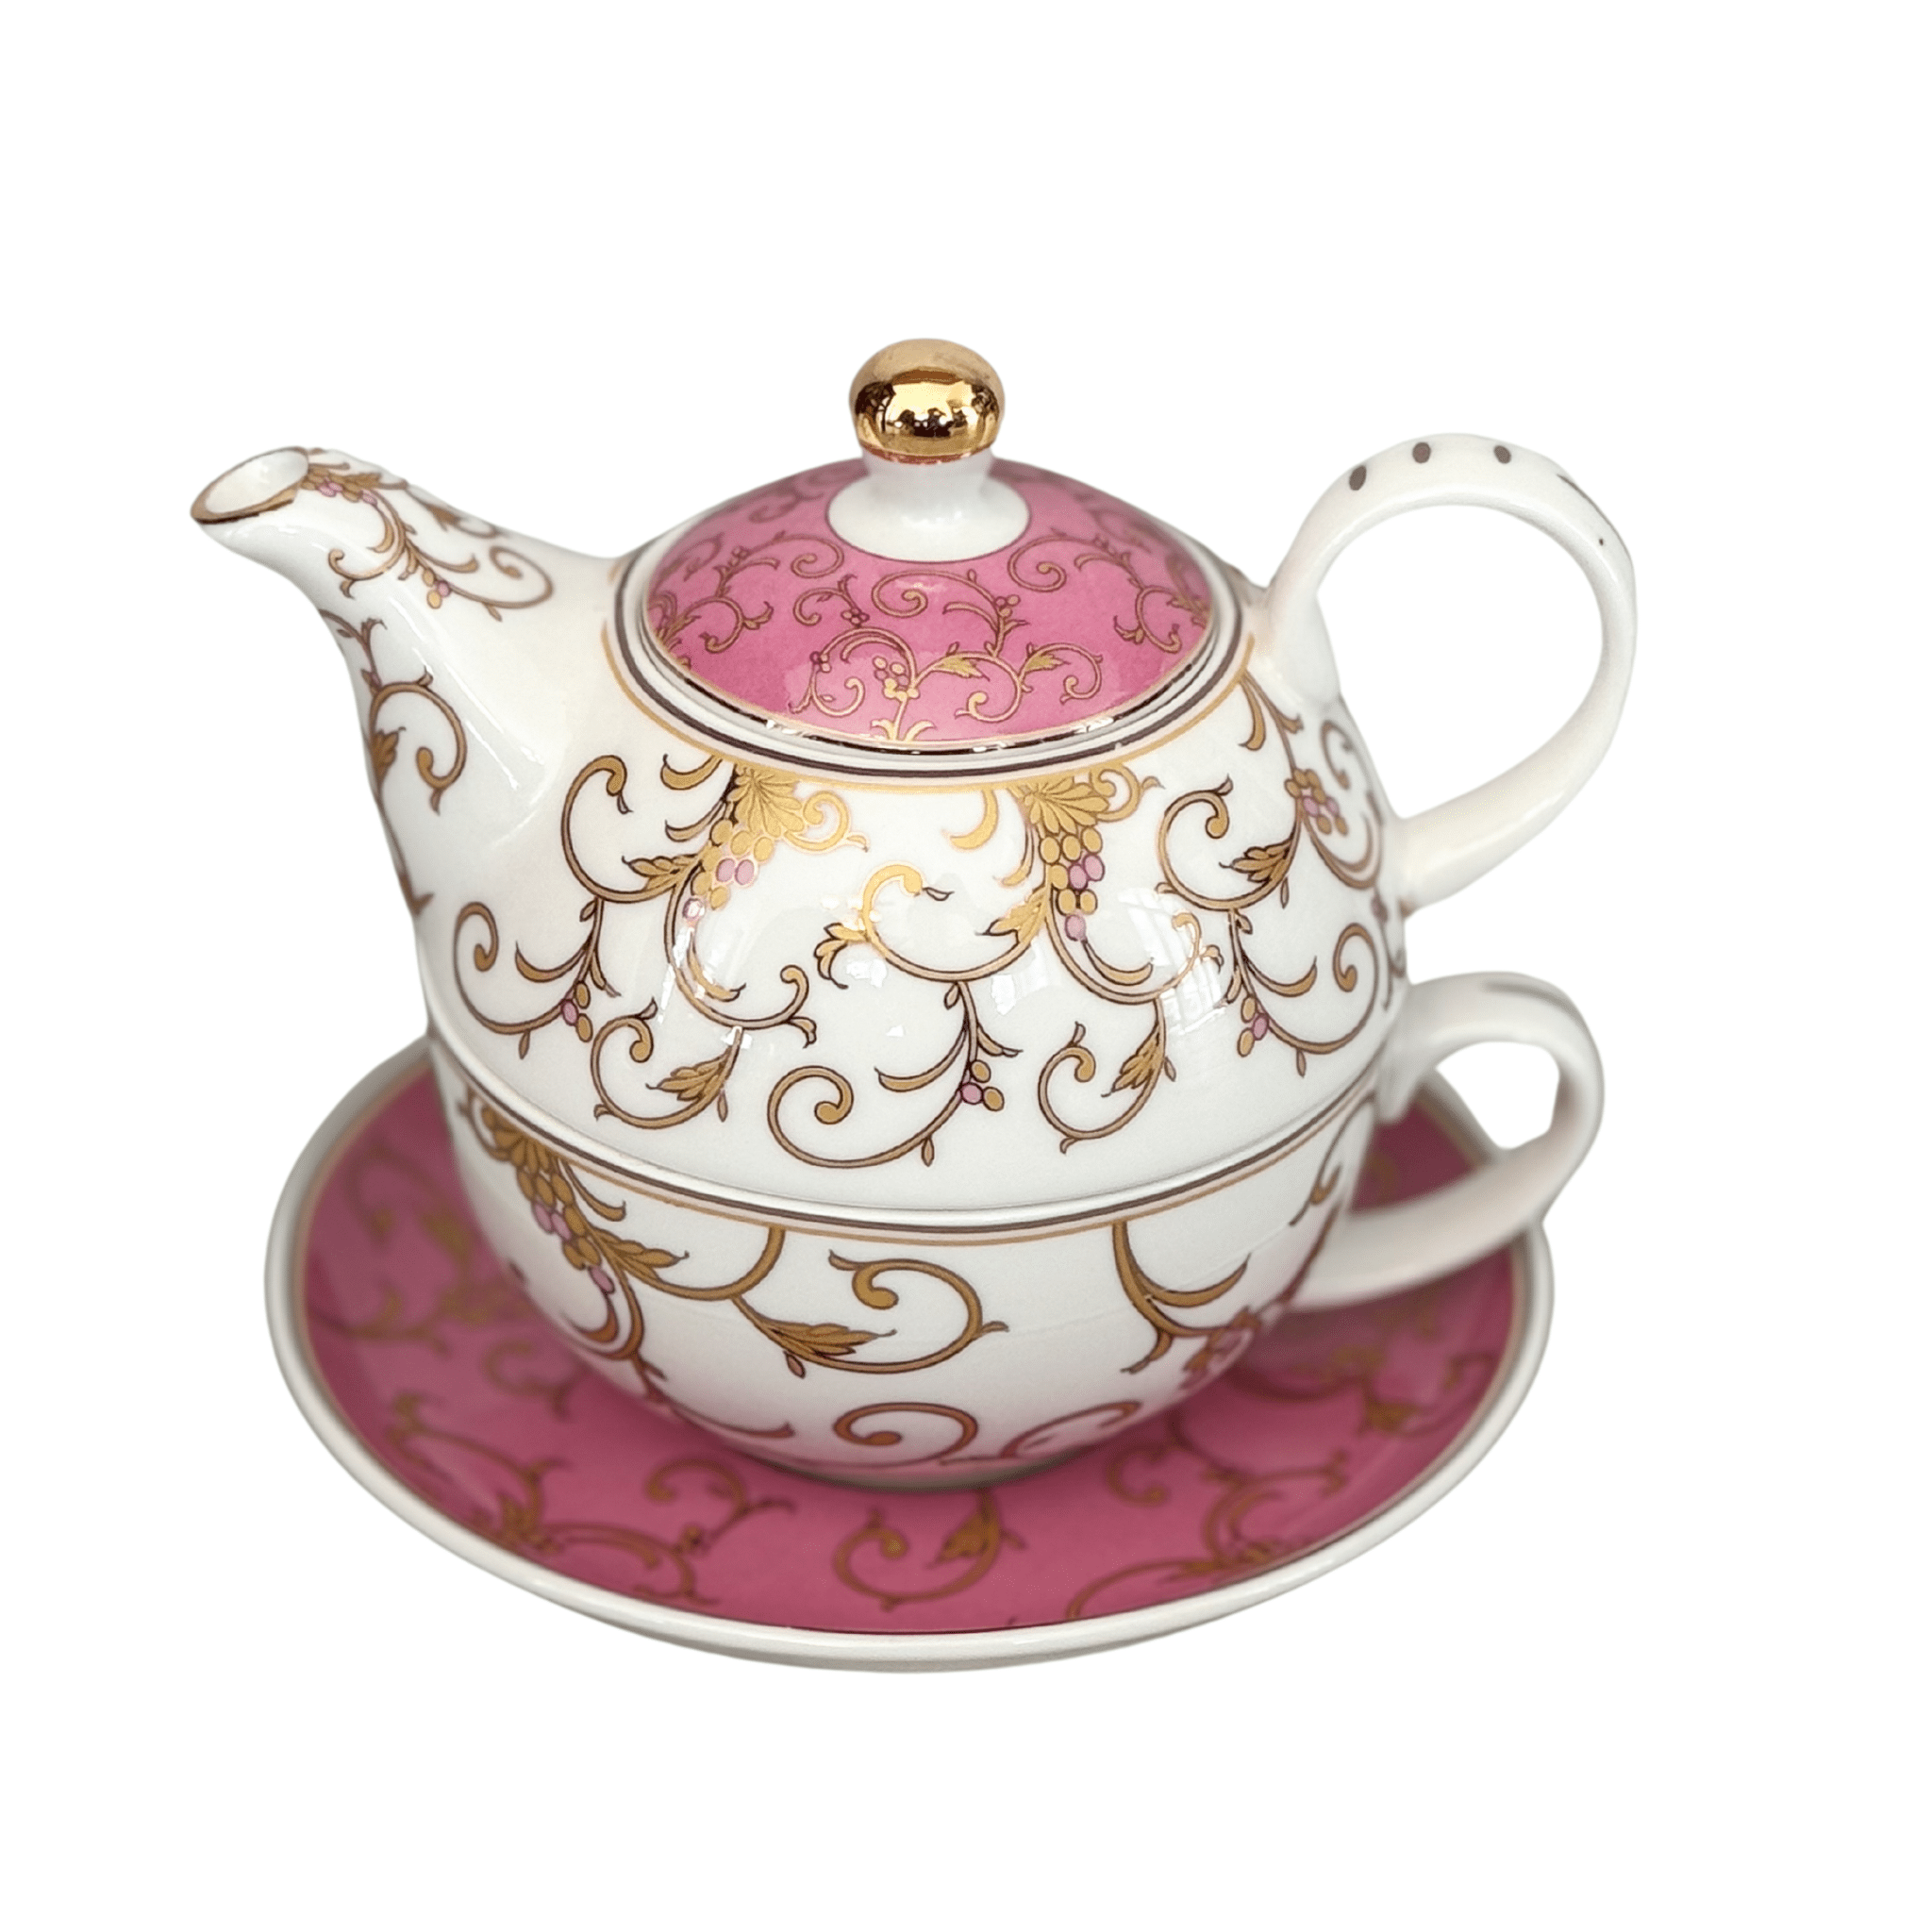 PINK & GOLD SCROLL TEA SET FOR ONE - FINE PORCELAIN - PLUME & WILLOW